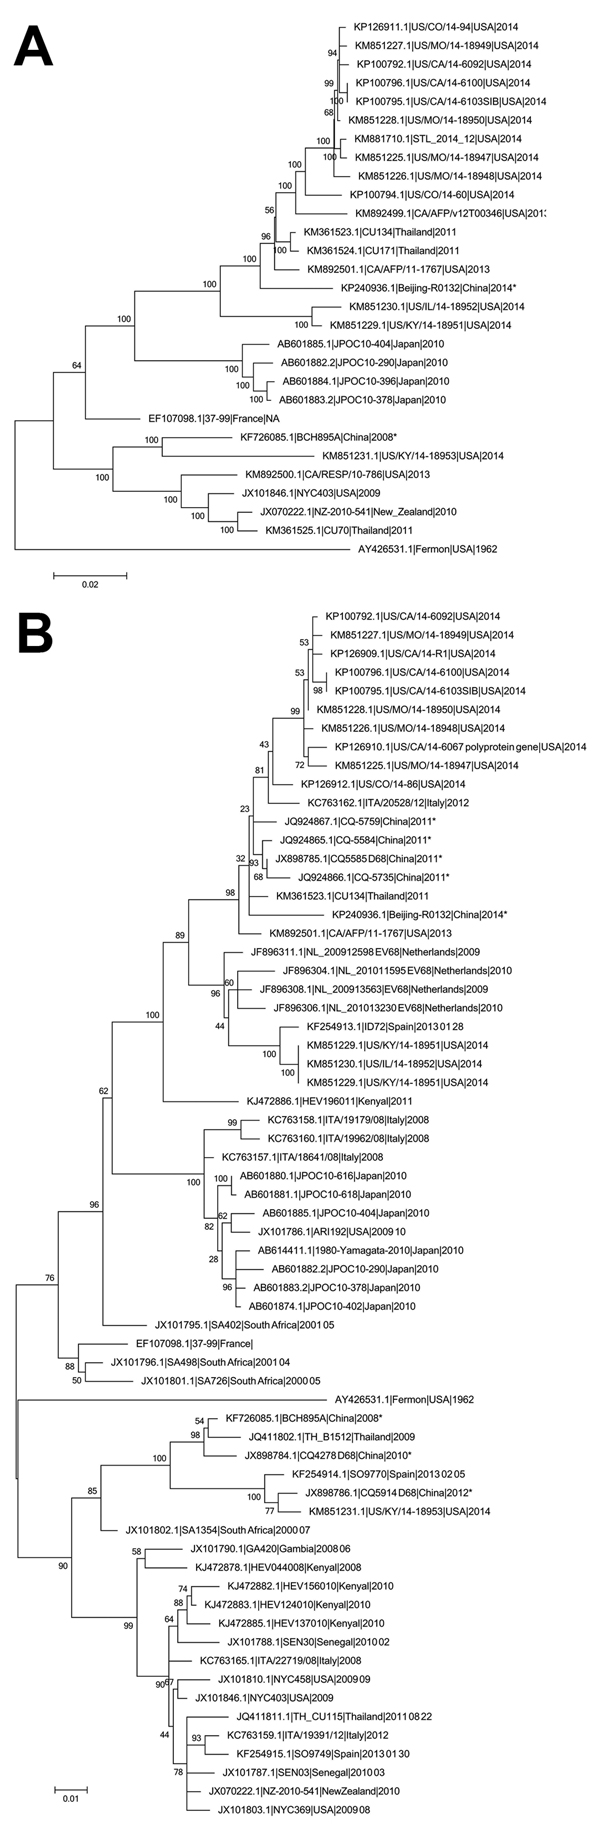 Phylogenetic analysis of enterovirus D68 (EV-D68) from different locations. The phylogenetic relationships of all complete or near-complete EV-D68 genomes (A) or representative viral protein 1 sequences from different countries (B) were estimated by using the maximum-likelihood method with 100 replicates bootstrapped by using MEGA (http://www.megasoftware.net). Bootstrap values were indicated on each tree. EV-D68 strains from China are indicated with an asterisk. GenBank accession numbers are sh